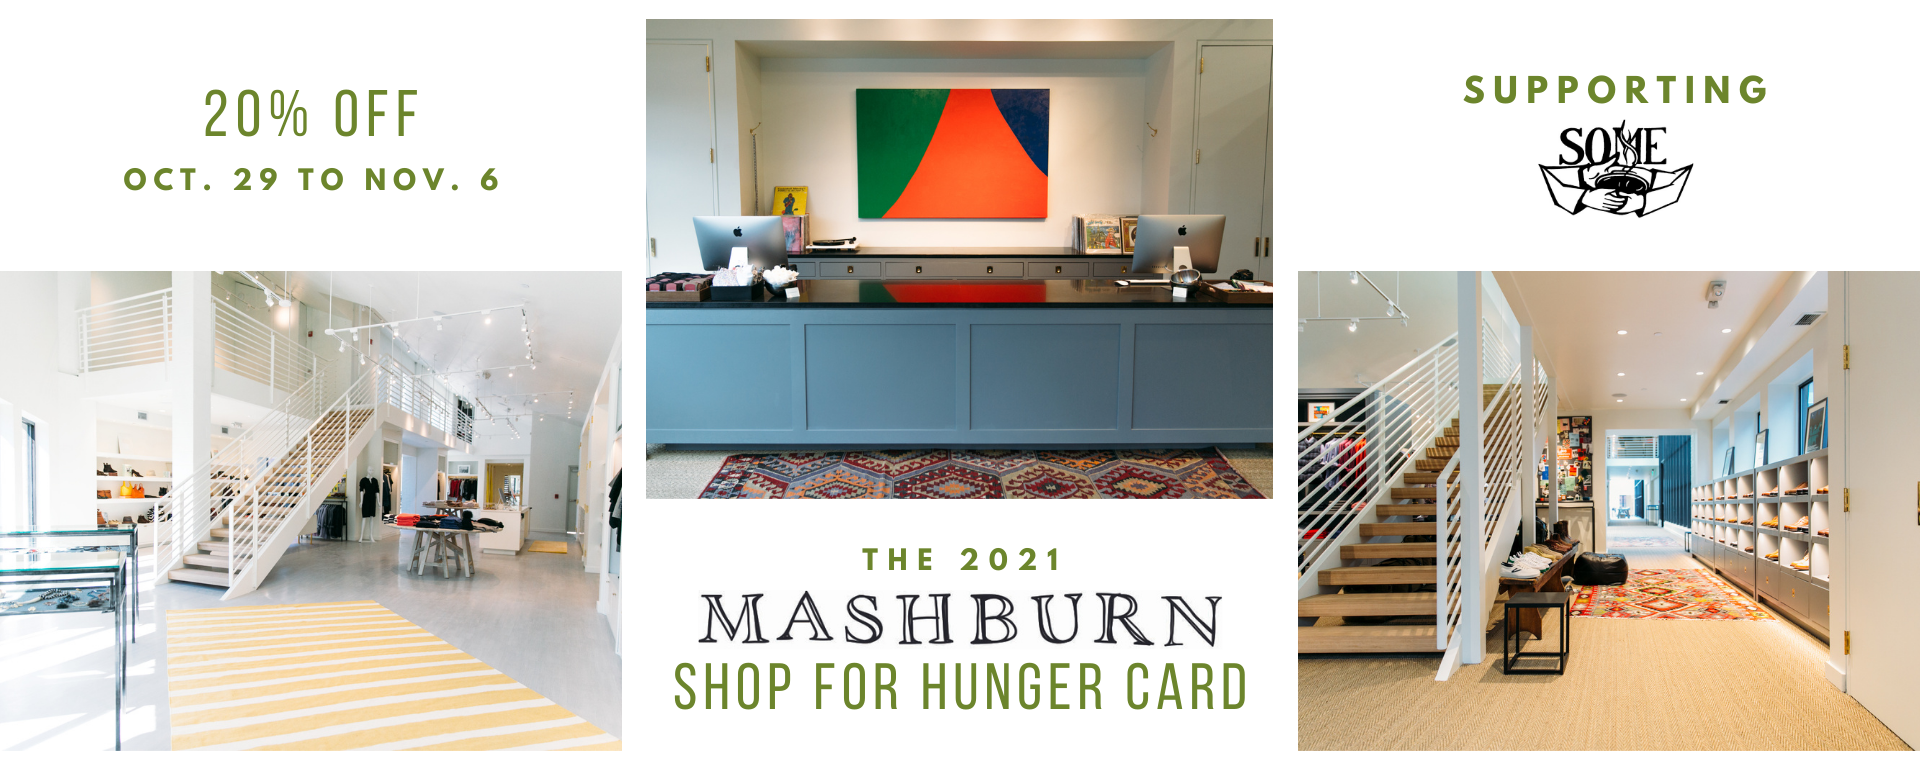 The 2021 MASHBURN Shop for Hunger card supports SOME (So Others Might Eat)